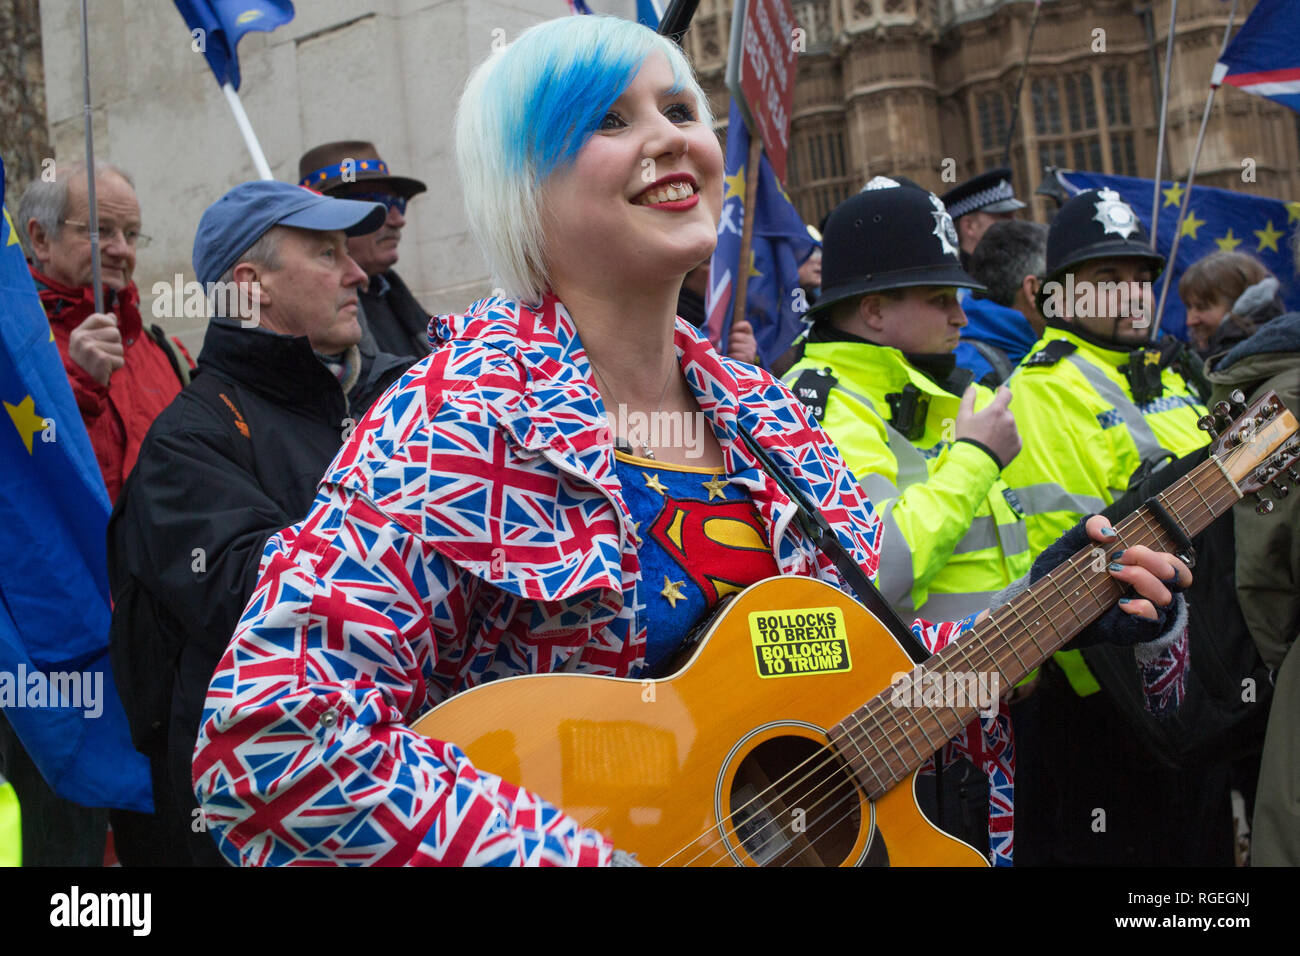 London UK 29th Jan 2019 A pro-EU protester Madeleina Kay sings a song opposite the Houses of Parliament in London on the day MPs vote on EU withdrawal deal amendments. Credit: Thabo Jaiyesimi/Alamy Live News Stock Photo